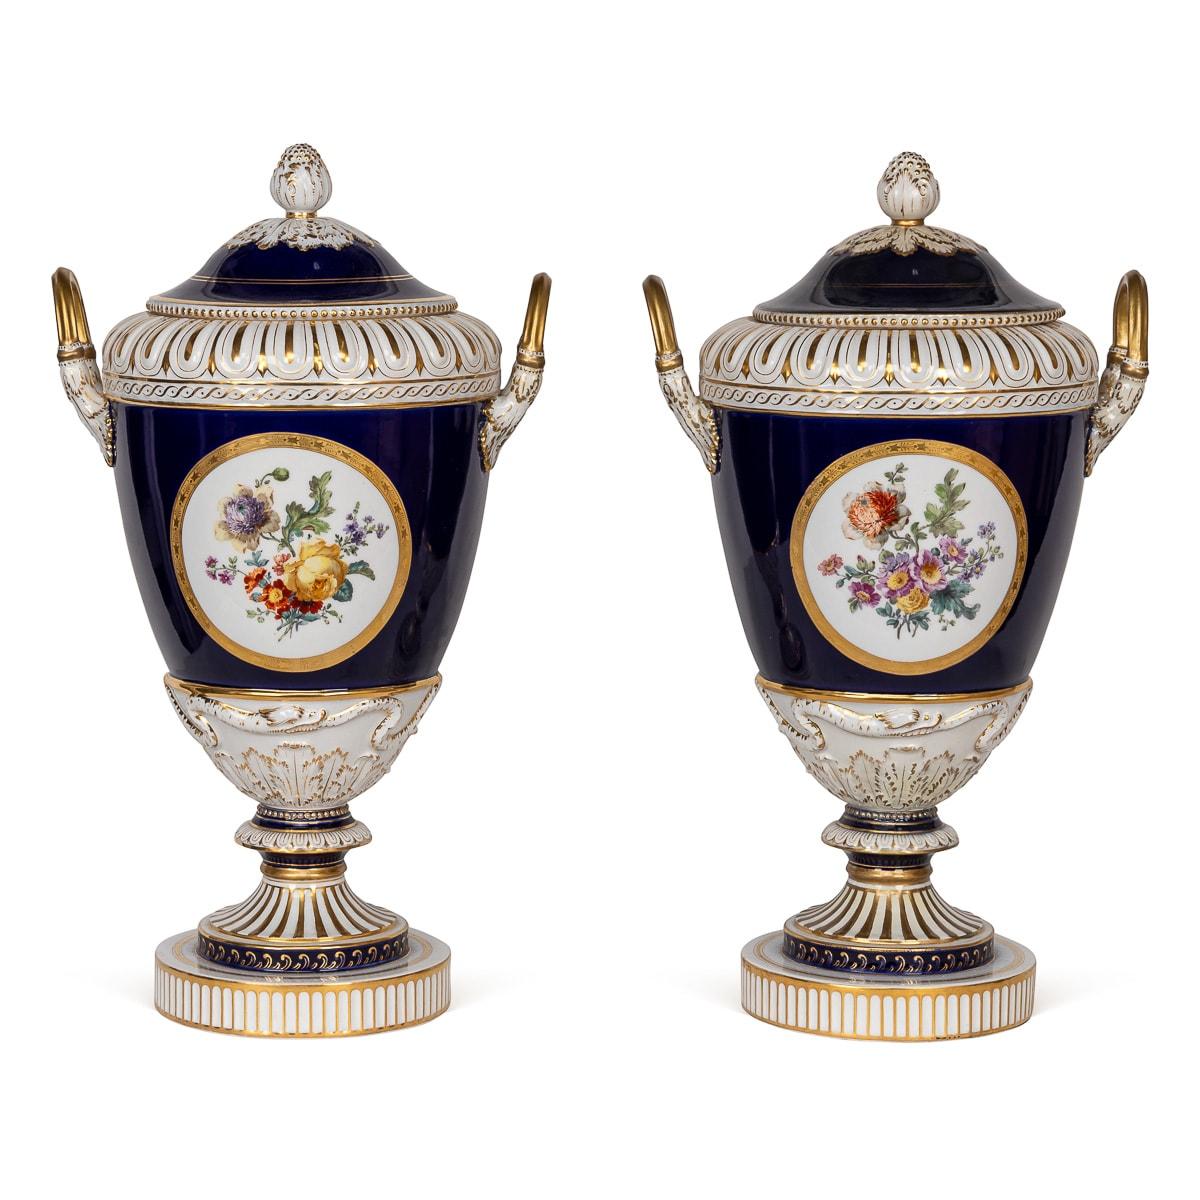 Antique 19Th Century German KPM Porcelain Two-Handled Vases And Covers c.1890 In Good Condition For Sale In Royal Tunbridge Wells, Kent